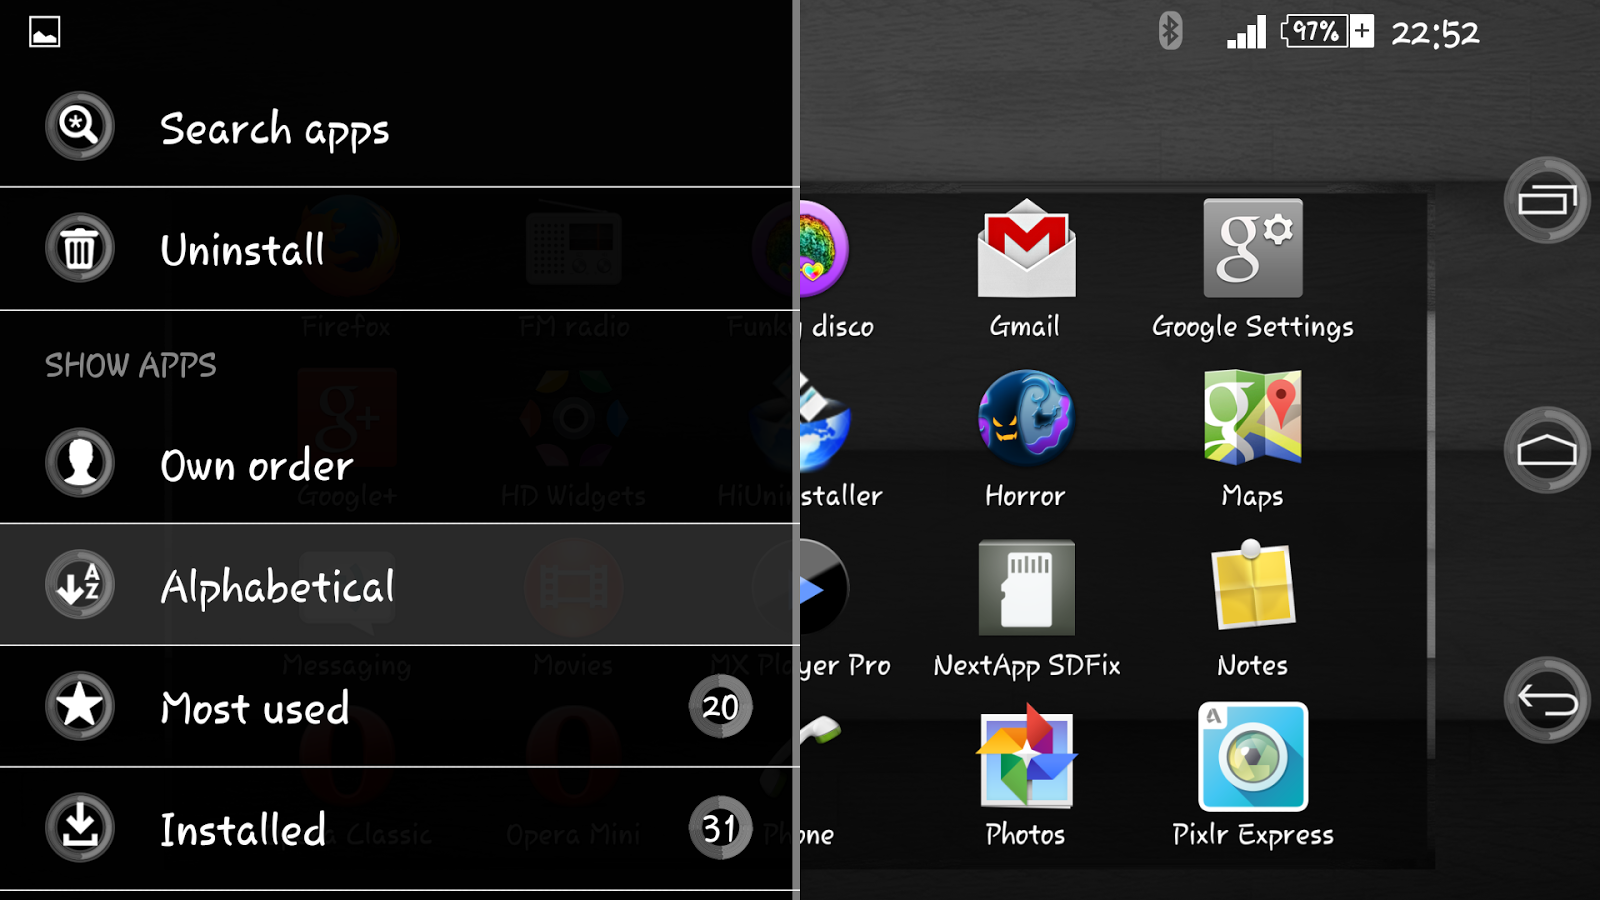 Spectra Dark Xperien Theme - Android Apps on Google Play